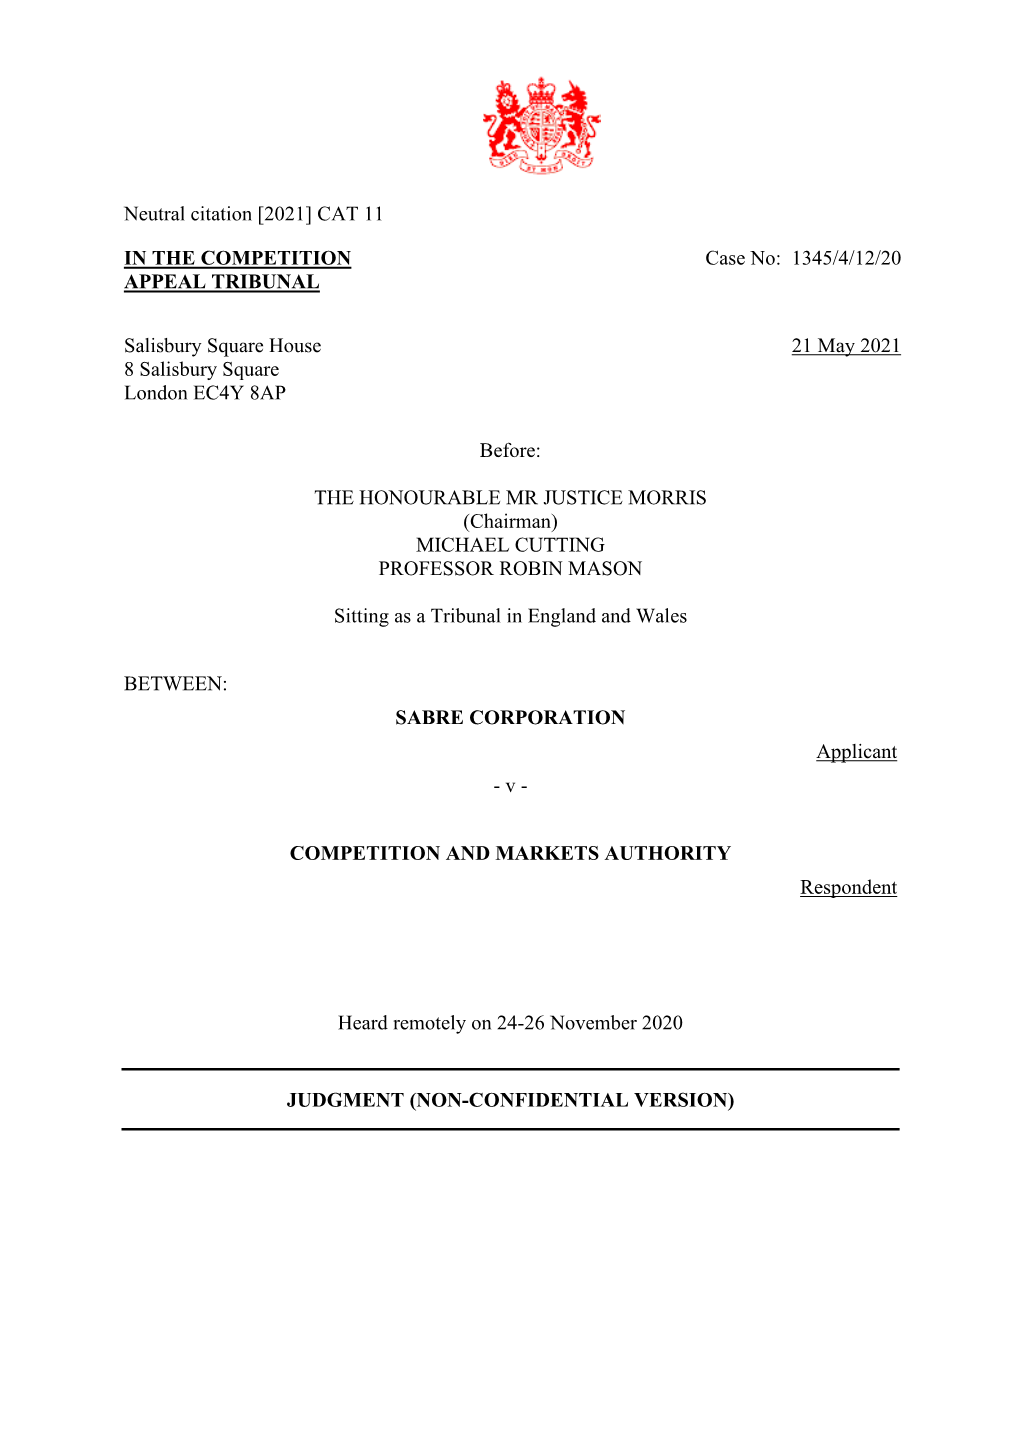 1345/4/12/20 Sabre Corporation V Competition and Markets Authority